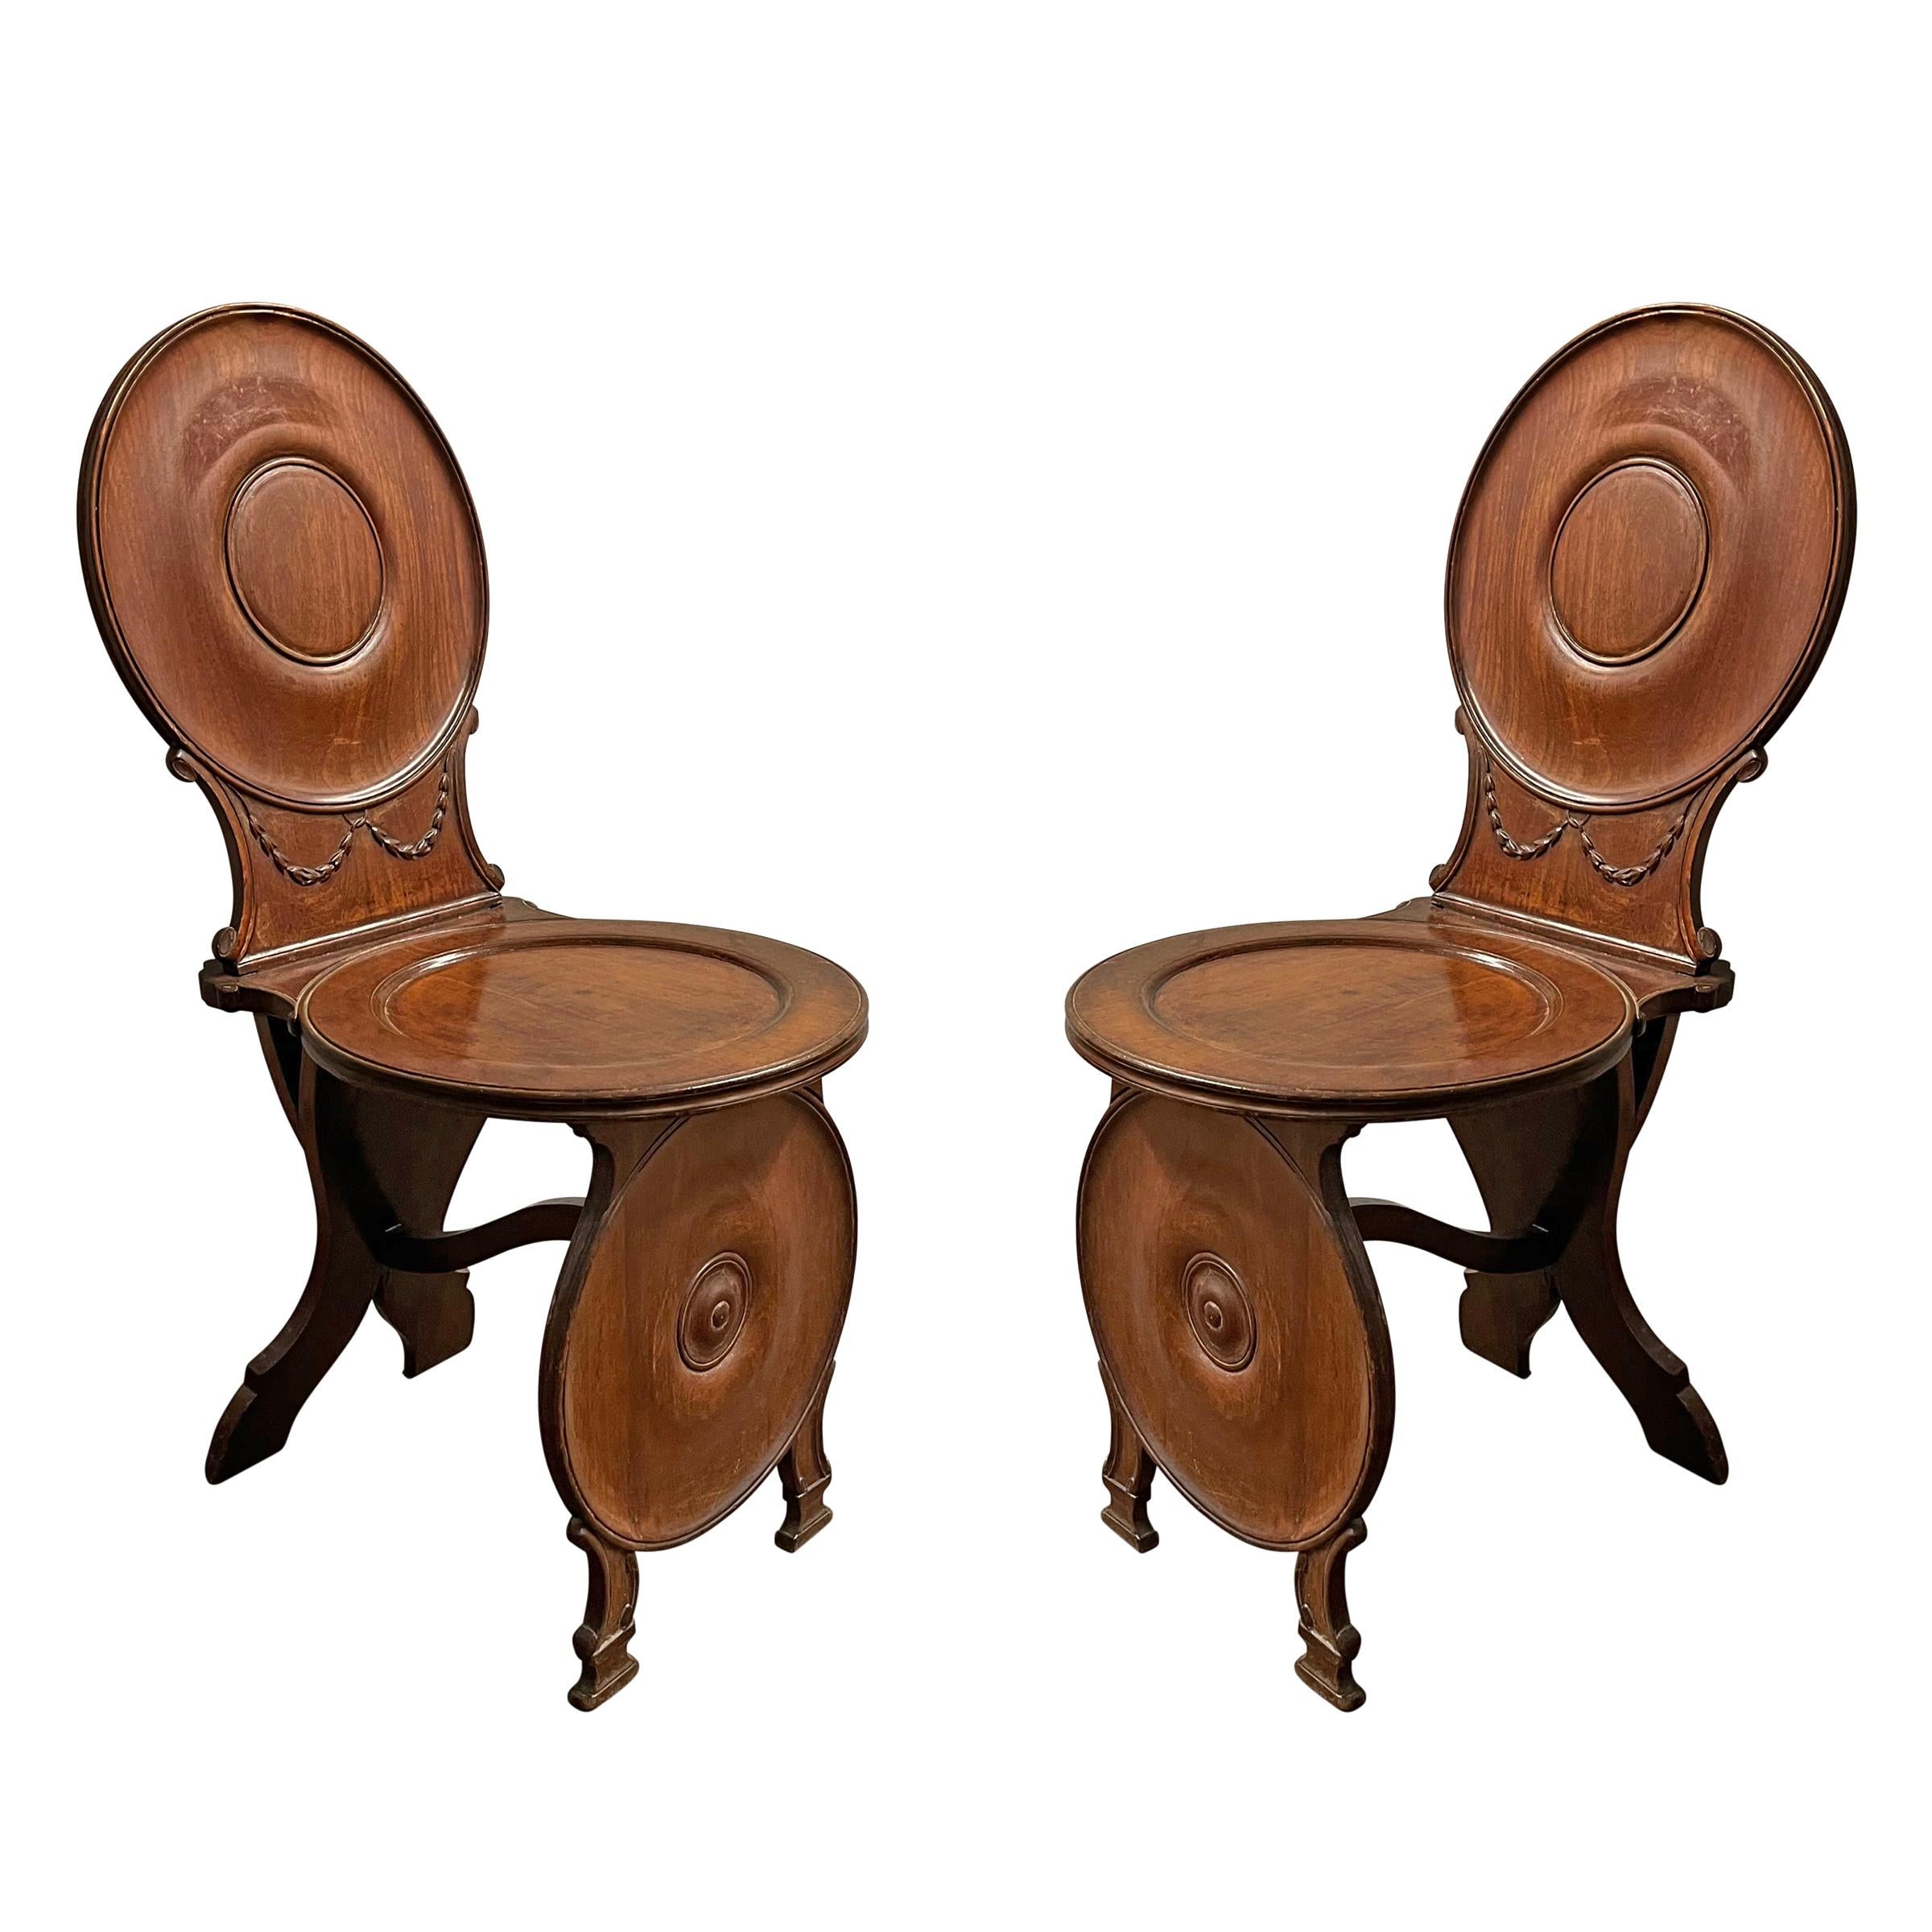 Empire Pair of Early 19th Century Italian Hall Chairs For Sale